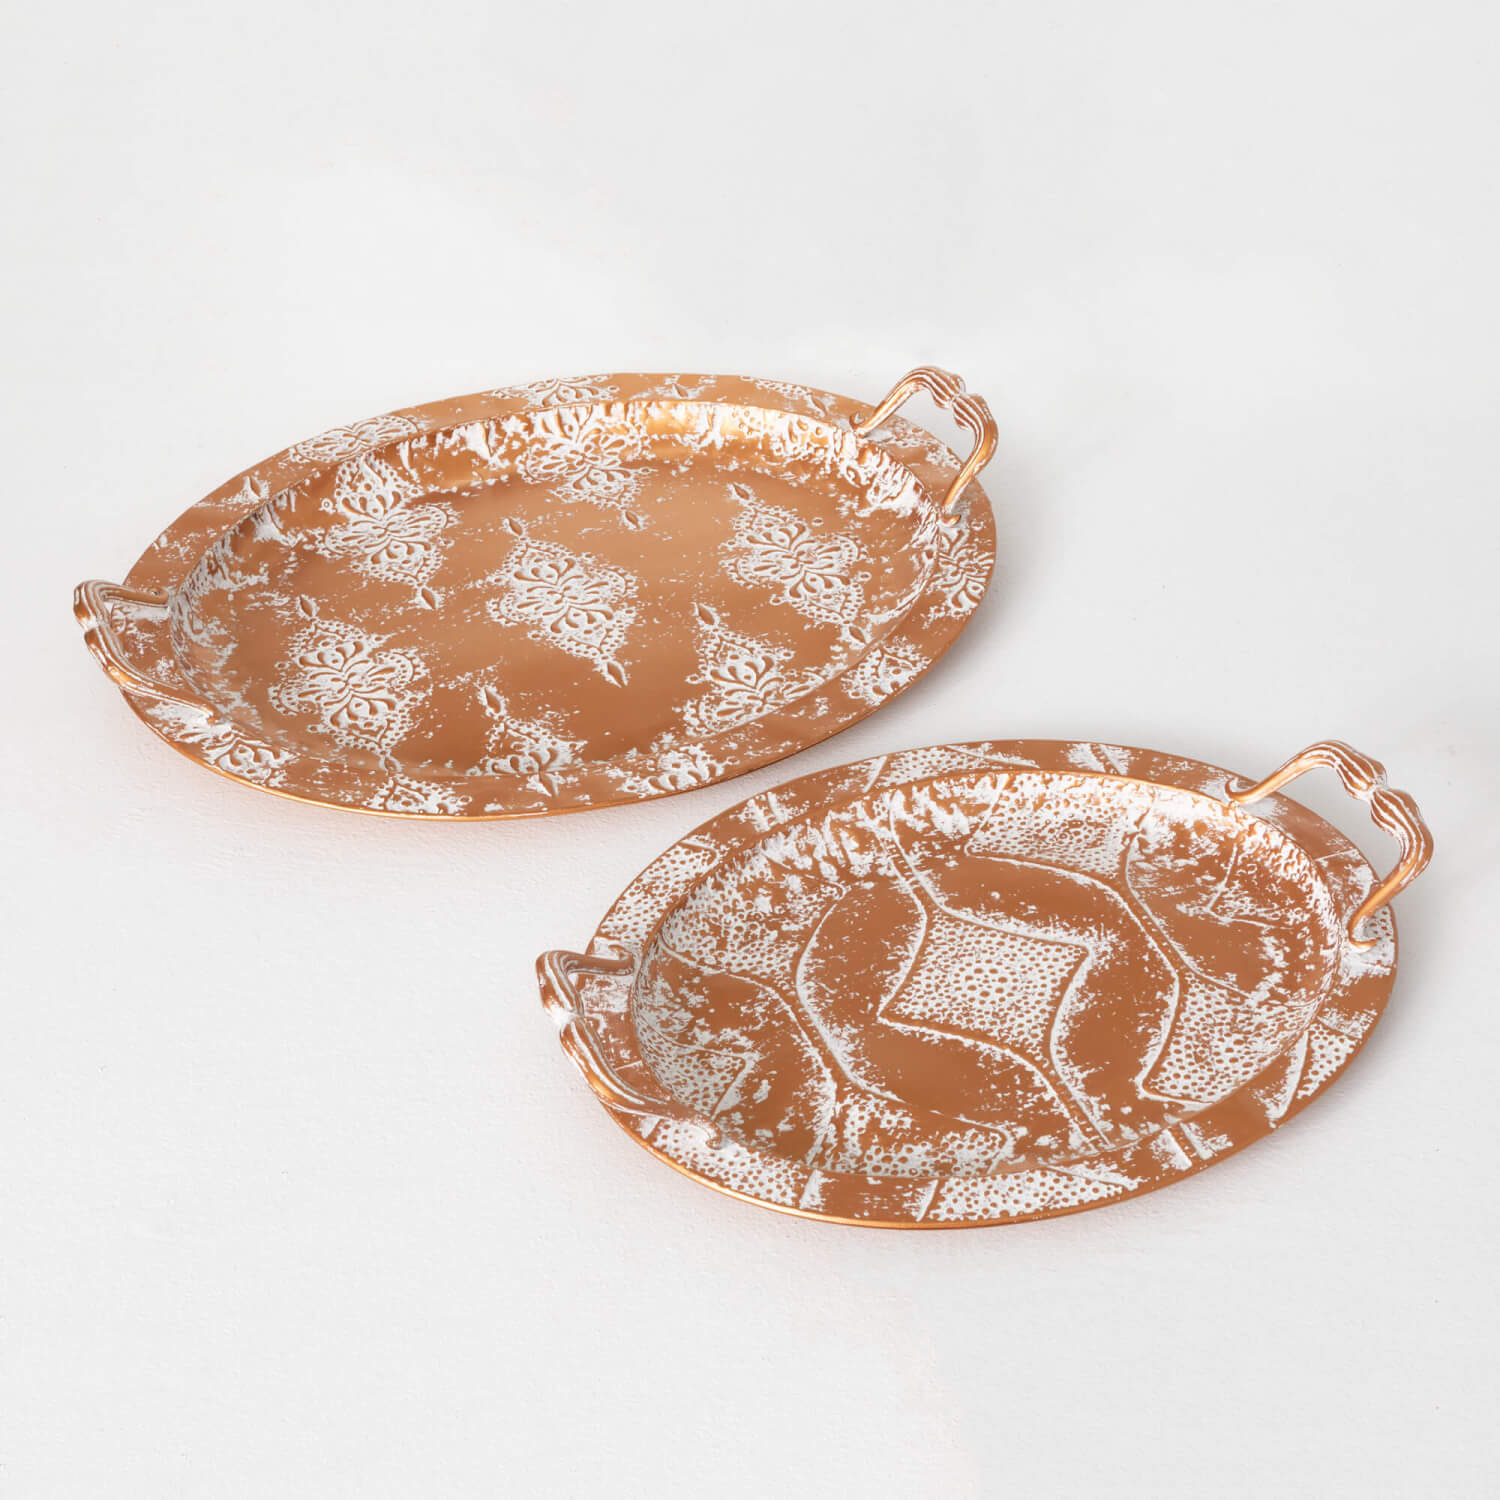 2 golden trays with handles and white washed geometric designs.